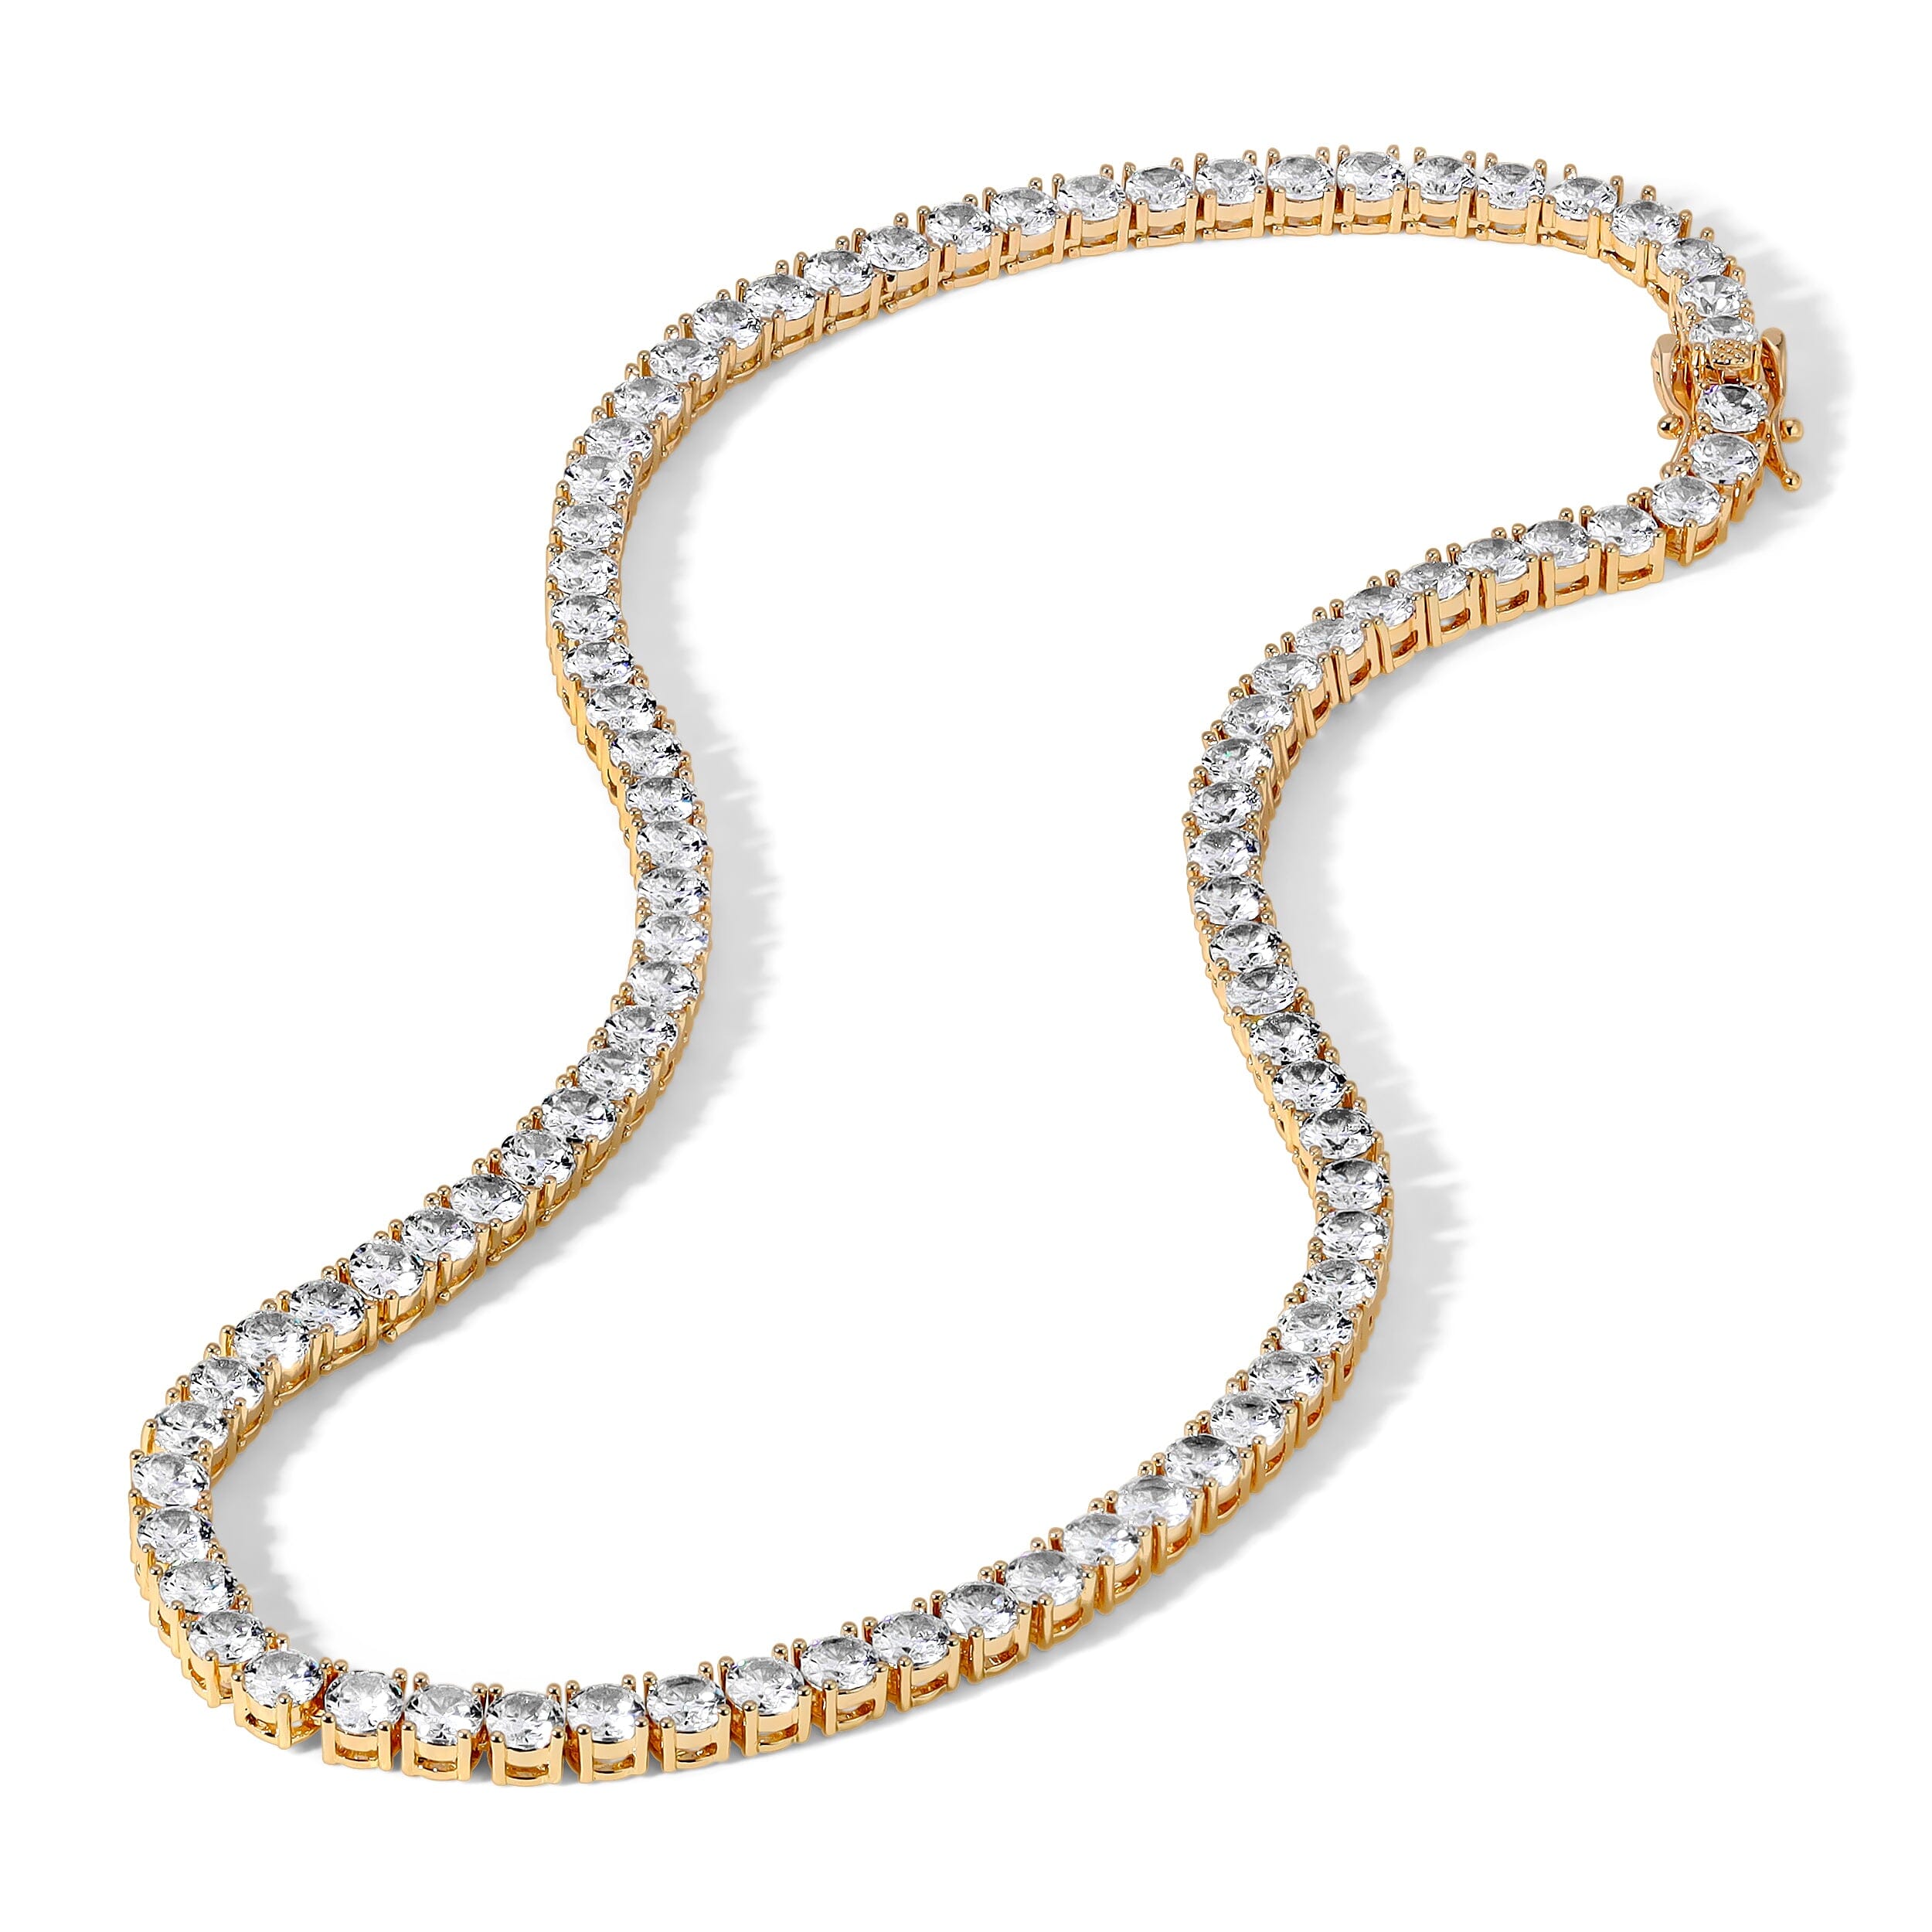 "I Can't Believe They're Not Real Diamonds" Tennis Necklace 20", 4.0mm White CZ Necklace Bloo & Ro 